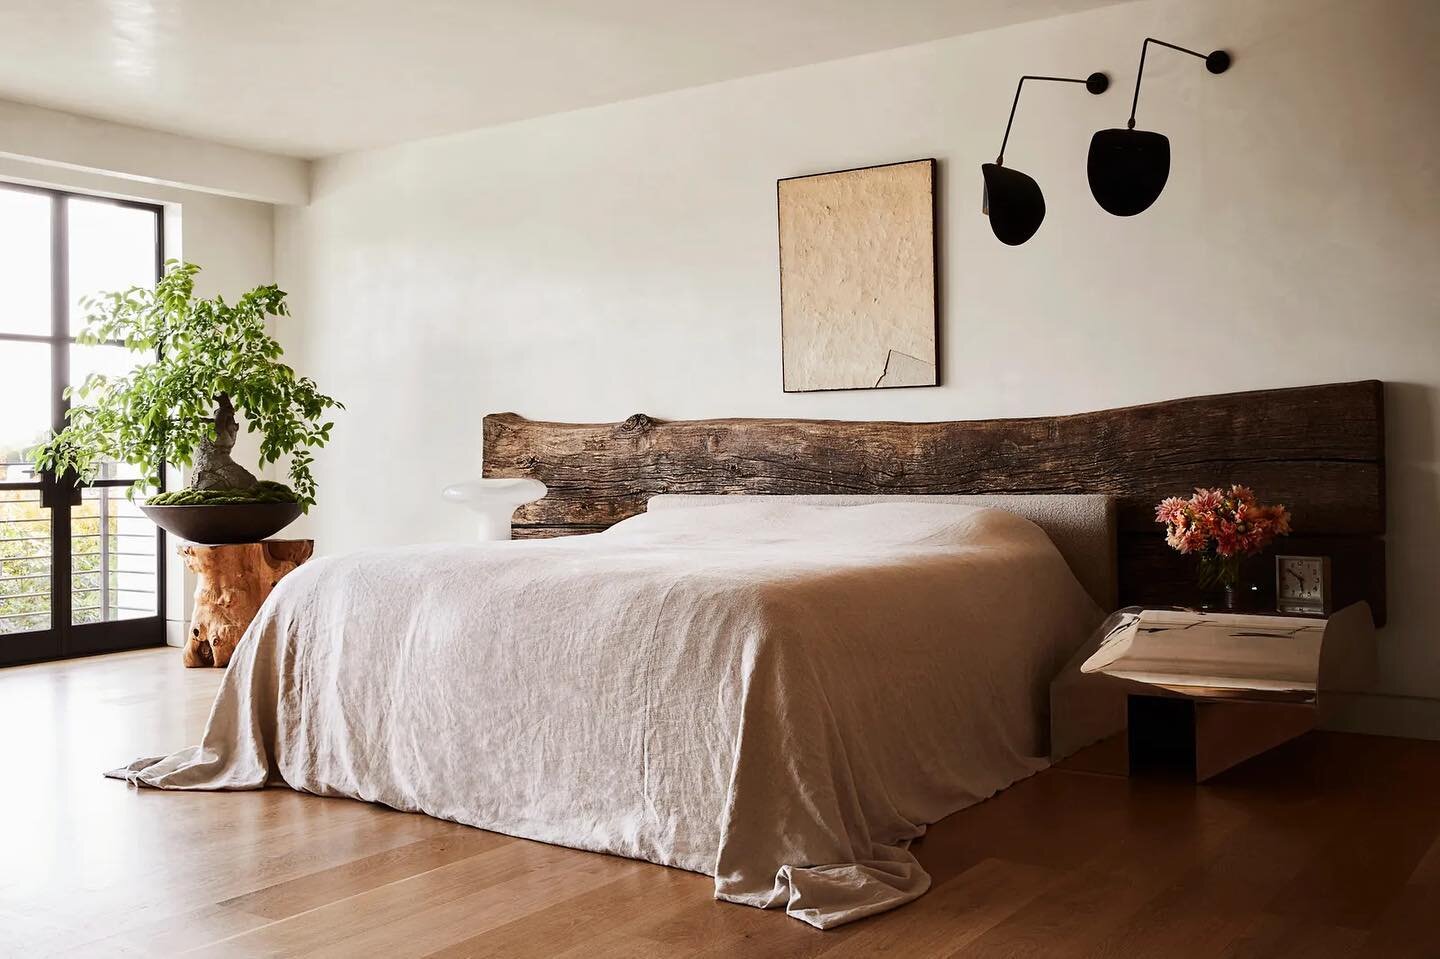 When it comes to making your bed, let&rsquo;s get back to the basics.

Design by @hallworthandheathens 
@archdigest 

#monasticbedroom #minimalistbedroomdesign #archdigest #colinking #interiorstyling #organicinteriors #simple #bedroomdesign #design #